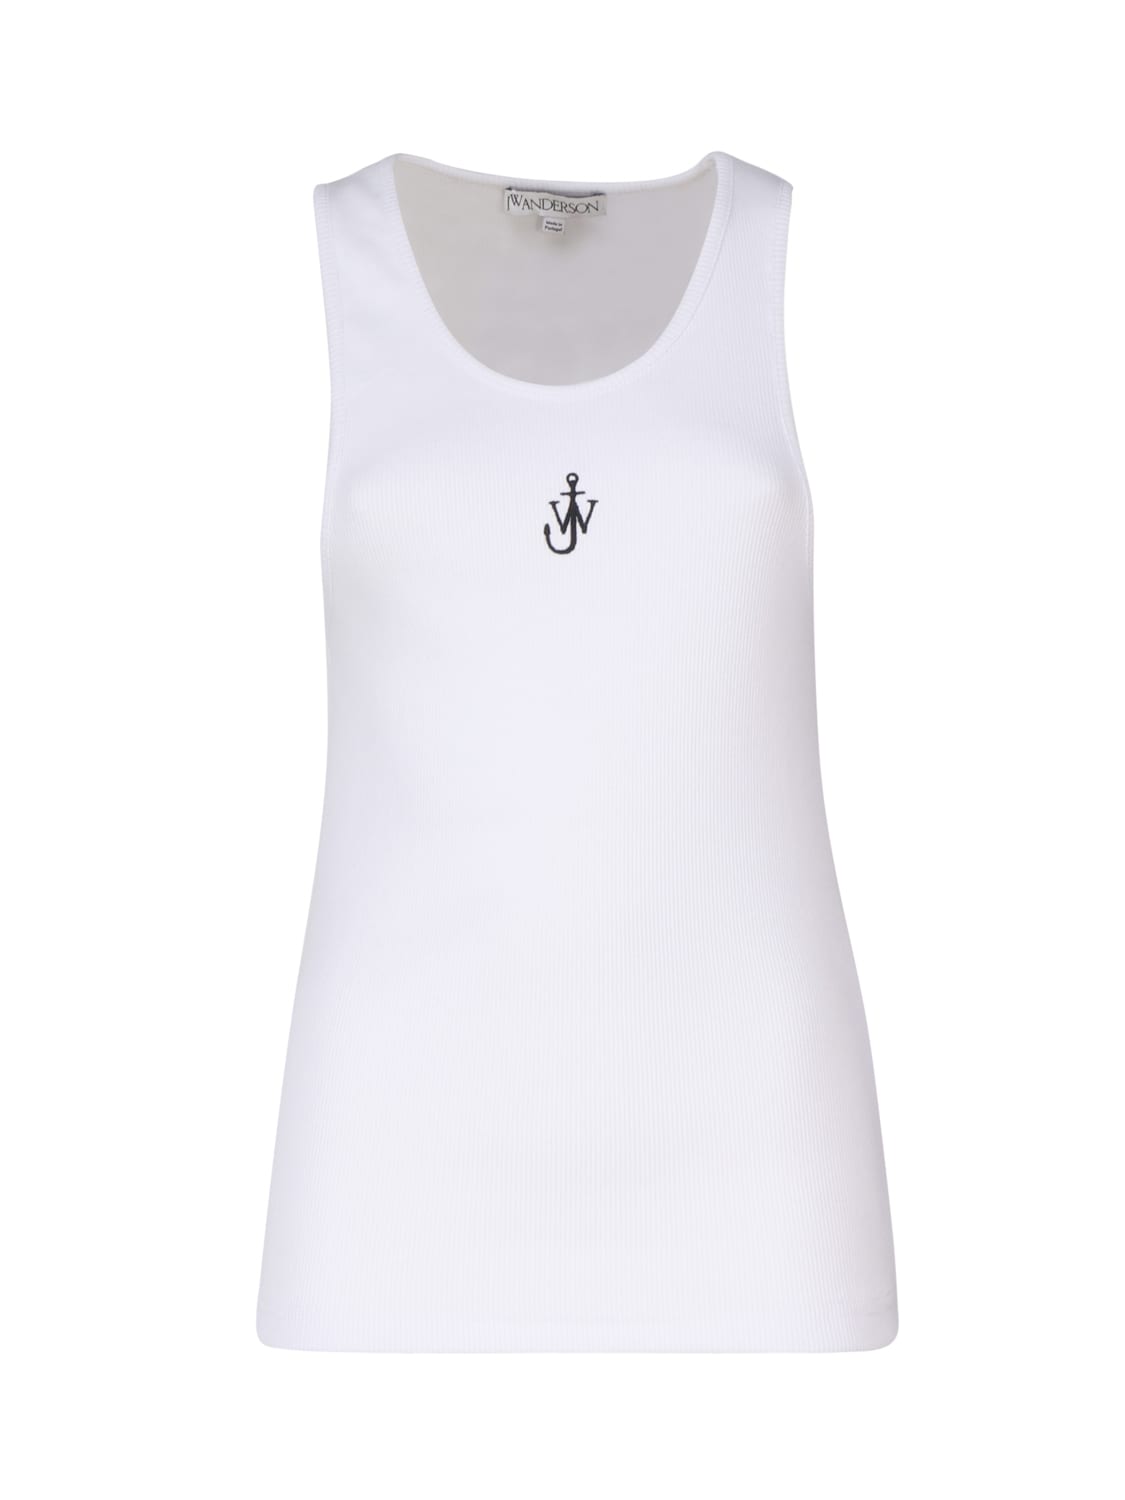 J.W. Anderson Tank Top With Embroidery